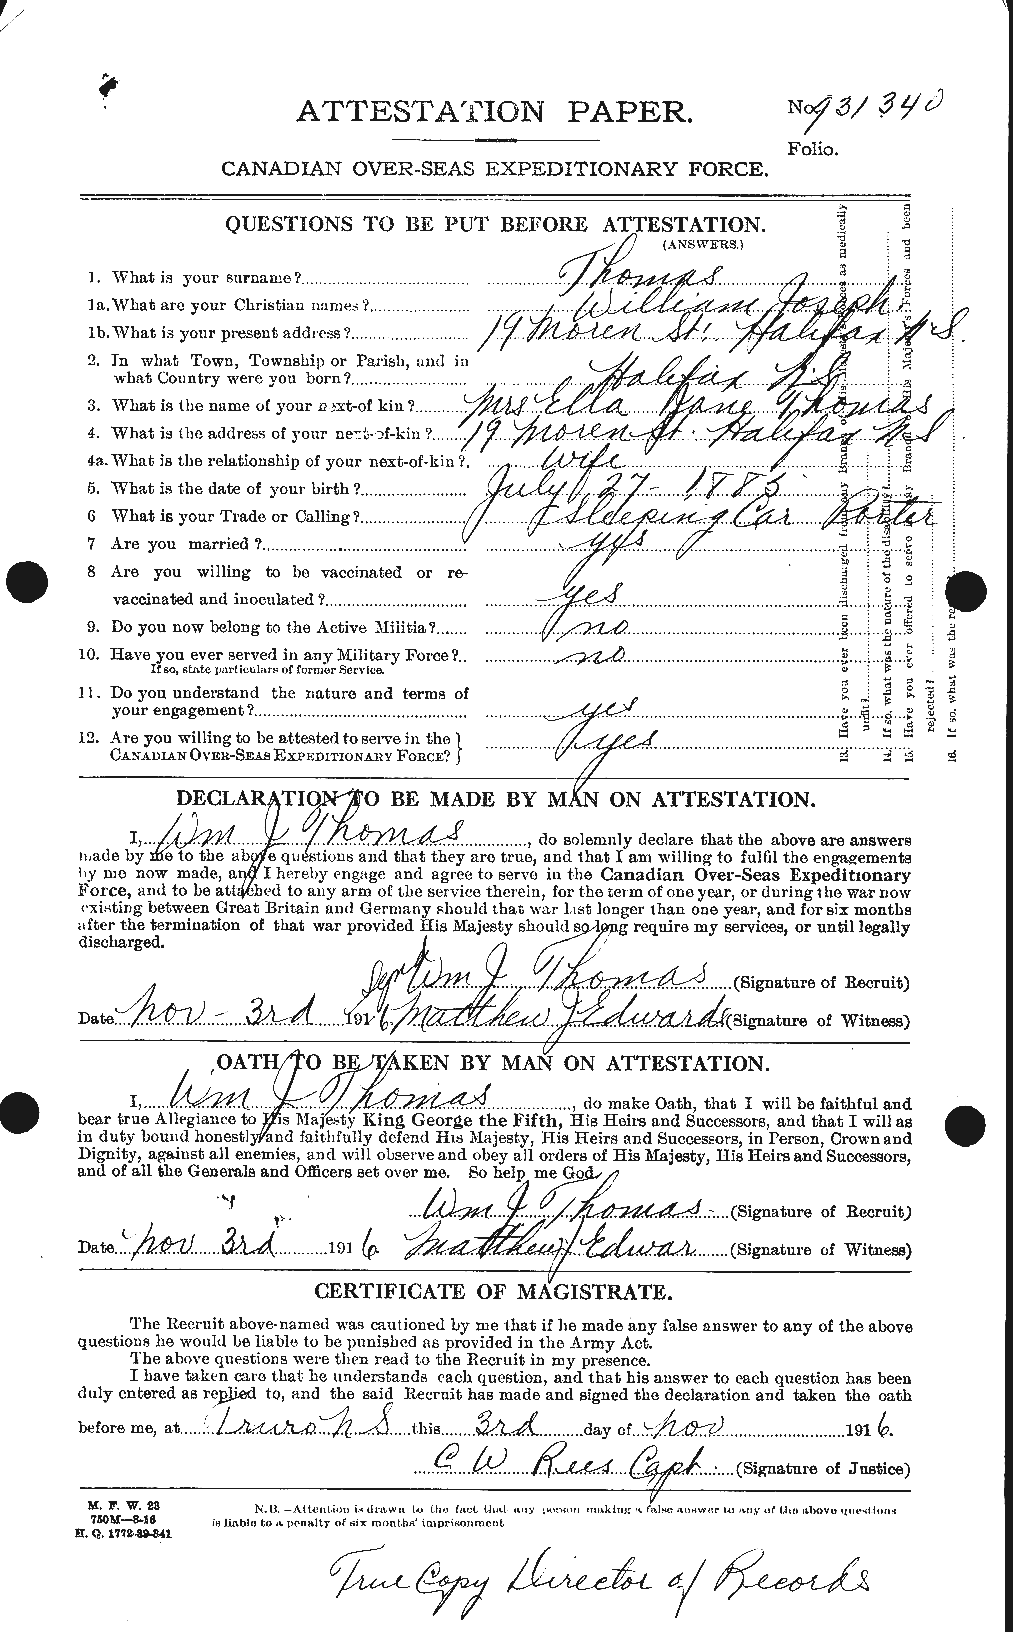 Personnel Records of the First World War - CEF 634503a